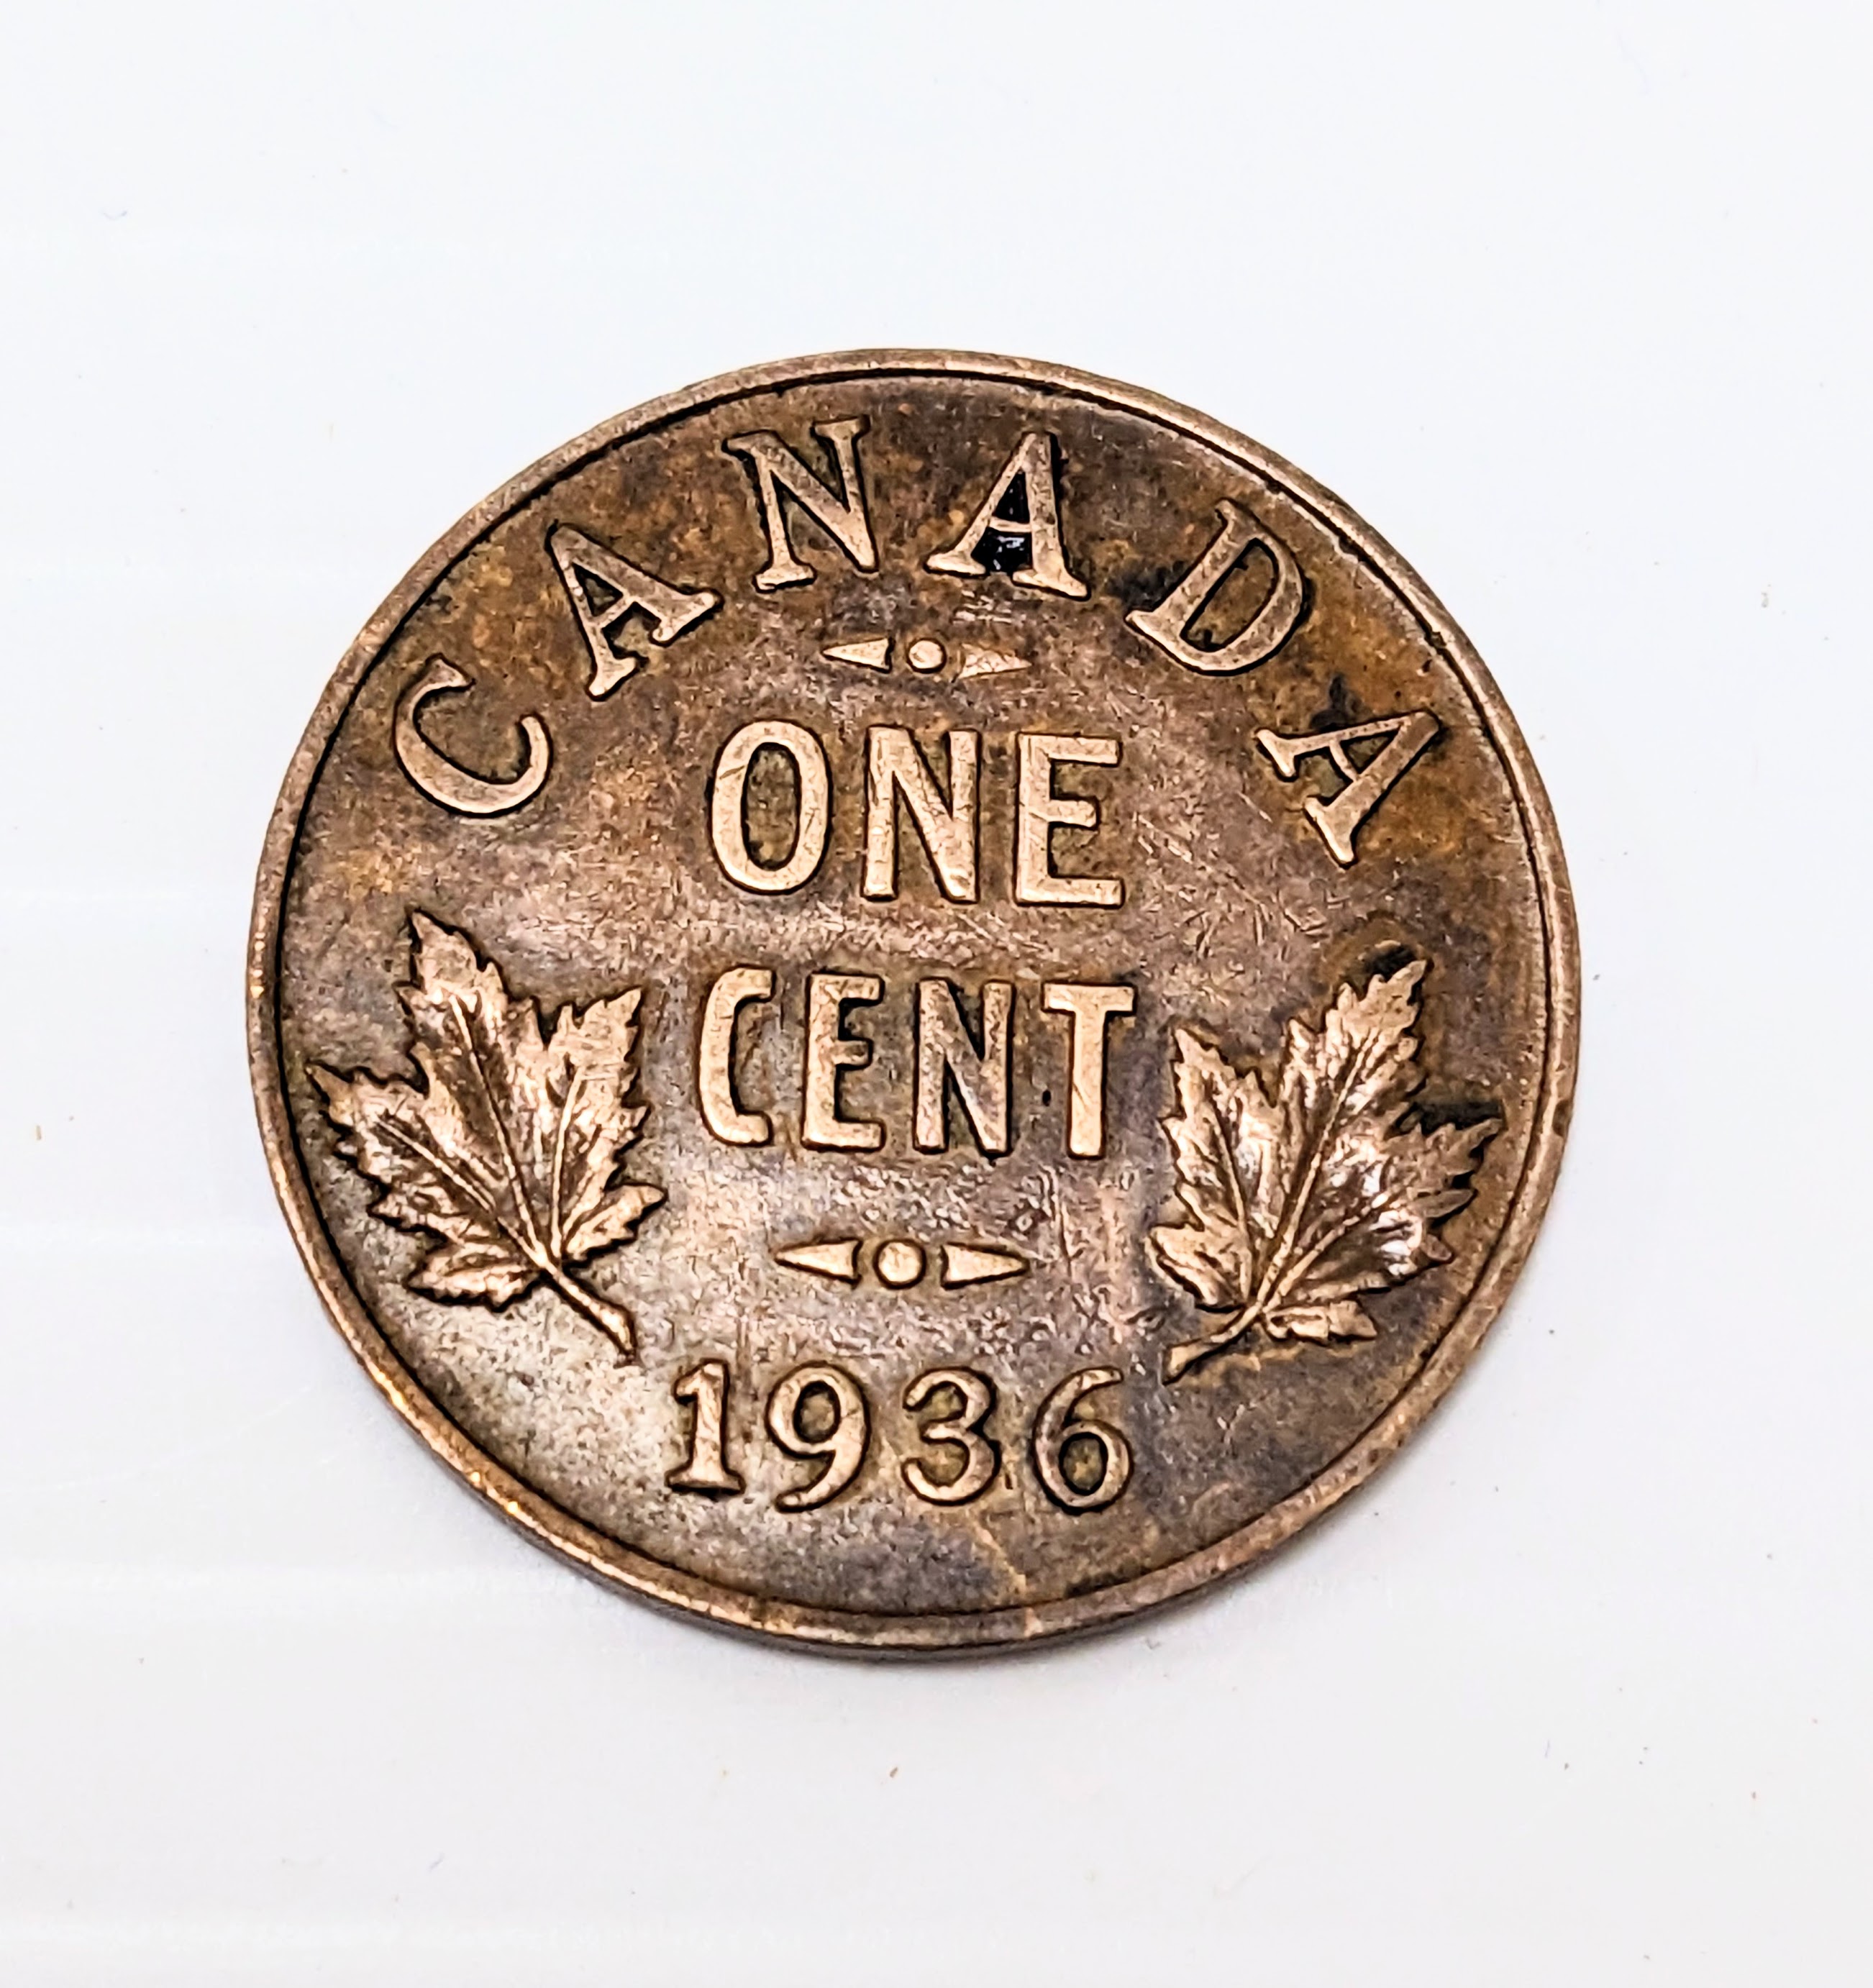 On this day in 1858 the nation of Canada introduced for the first time official 1¢ 5¢ 10¢ and 20¢ coins. This coin isn't quite as old but does date from 1936 when it held the equivalent buying power of todays 20¢ coin. Though made in 1936, this coin is not one of the exceedingly rare "Canadian Dot Cent", but, if you would like to learn more about that drama - follow this link
https://www.pcgs.com/news/rare-canadian-1936-dot-cent
The penny was phased out of canadian circulation February 4, 2013 - 155 years after it's creation. This particular one was found during restorations of the Old Bay House.
2008.32.13 / Friends of the Old Bay House Society.
12/12/2022